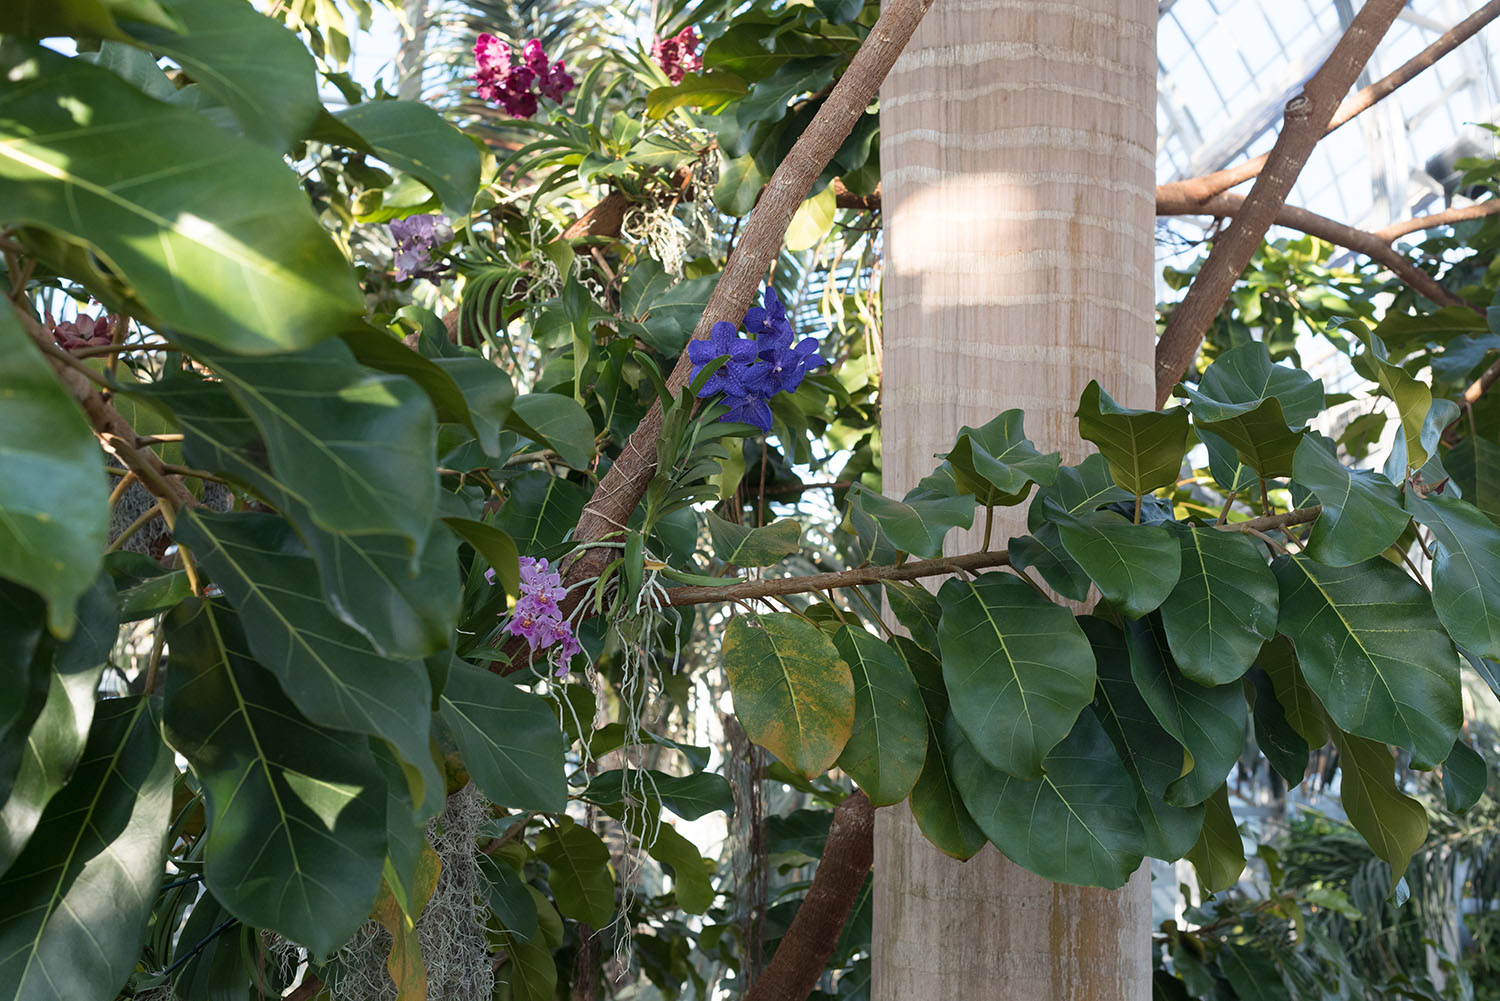 A purple orchid grows among the palms at the United States Botanic Garden in Washington DC, as photographed by Canadian travel blogger Cee Fardoe of Coco & Vera